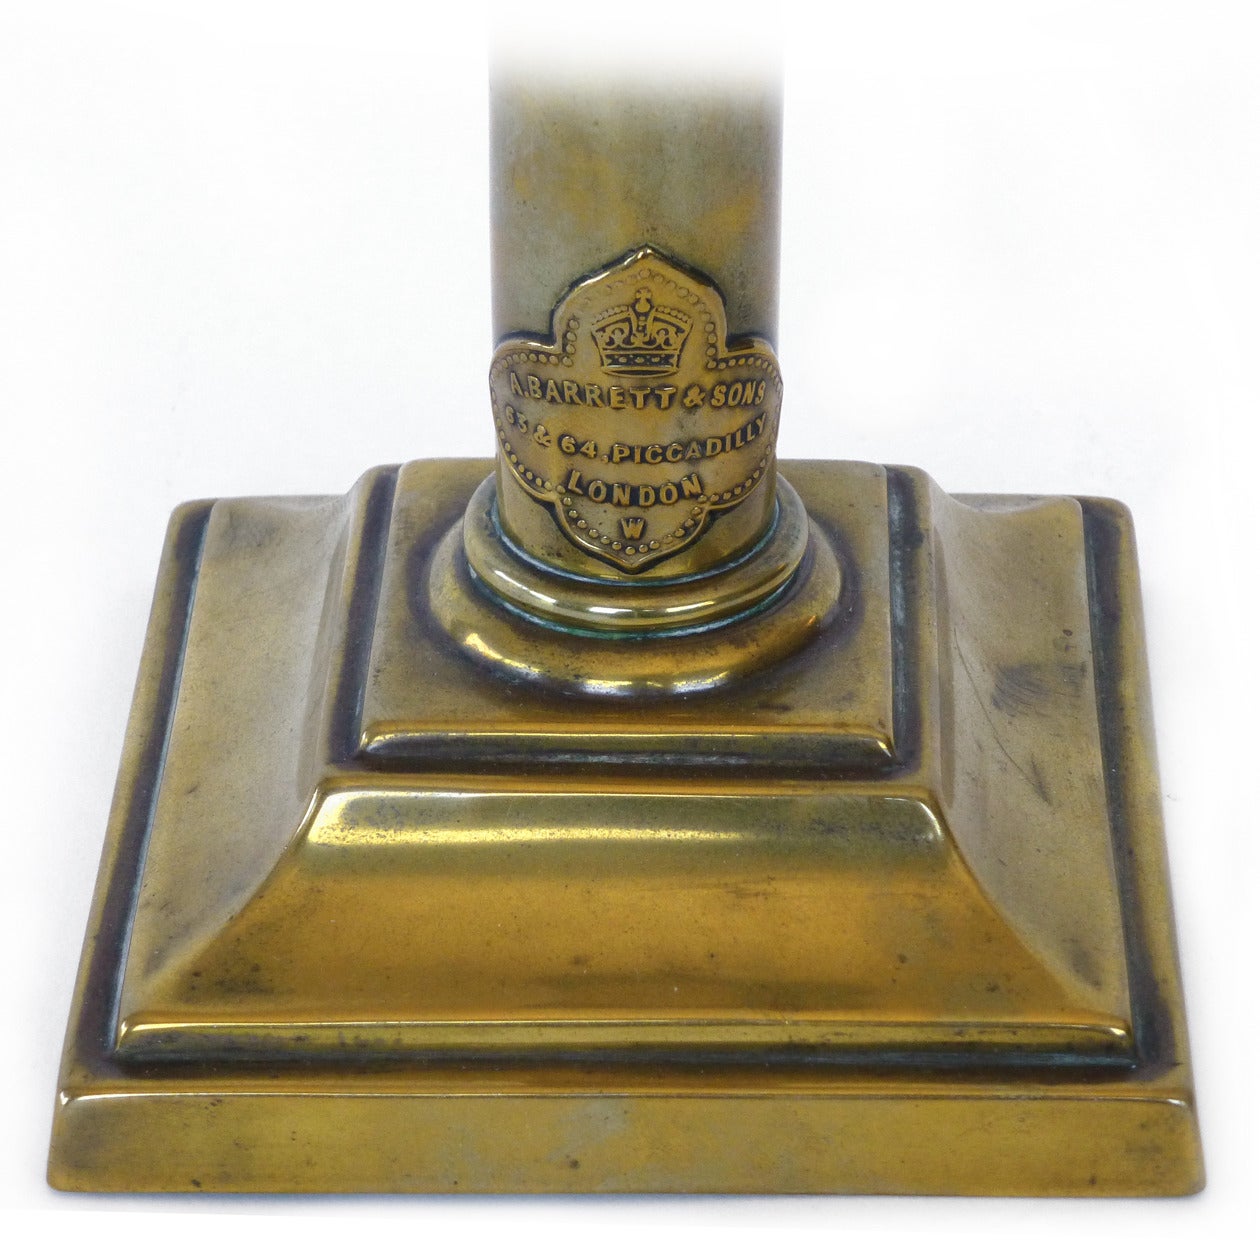 English Signed Brass Spring Loaded Candlestick, circa 1870

“A. BARRETT & SONS… 63 & 64 PICCADILLY LONDON… NO 6”